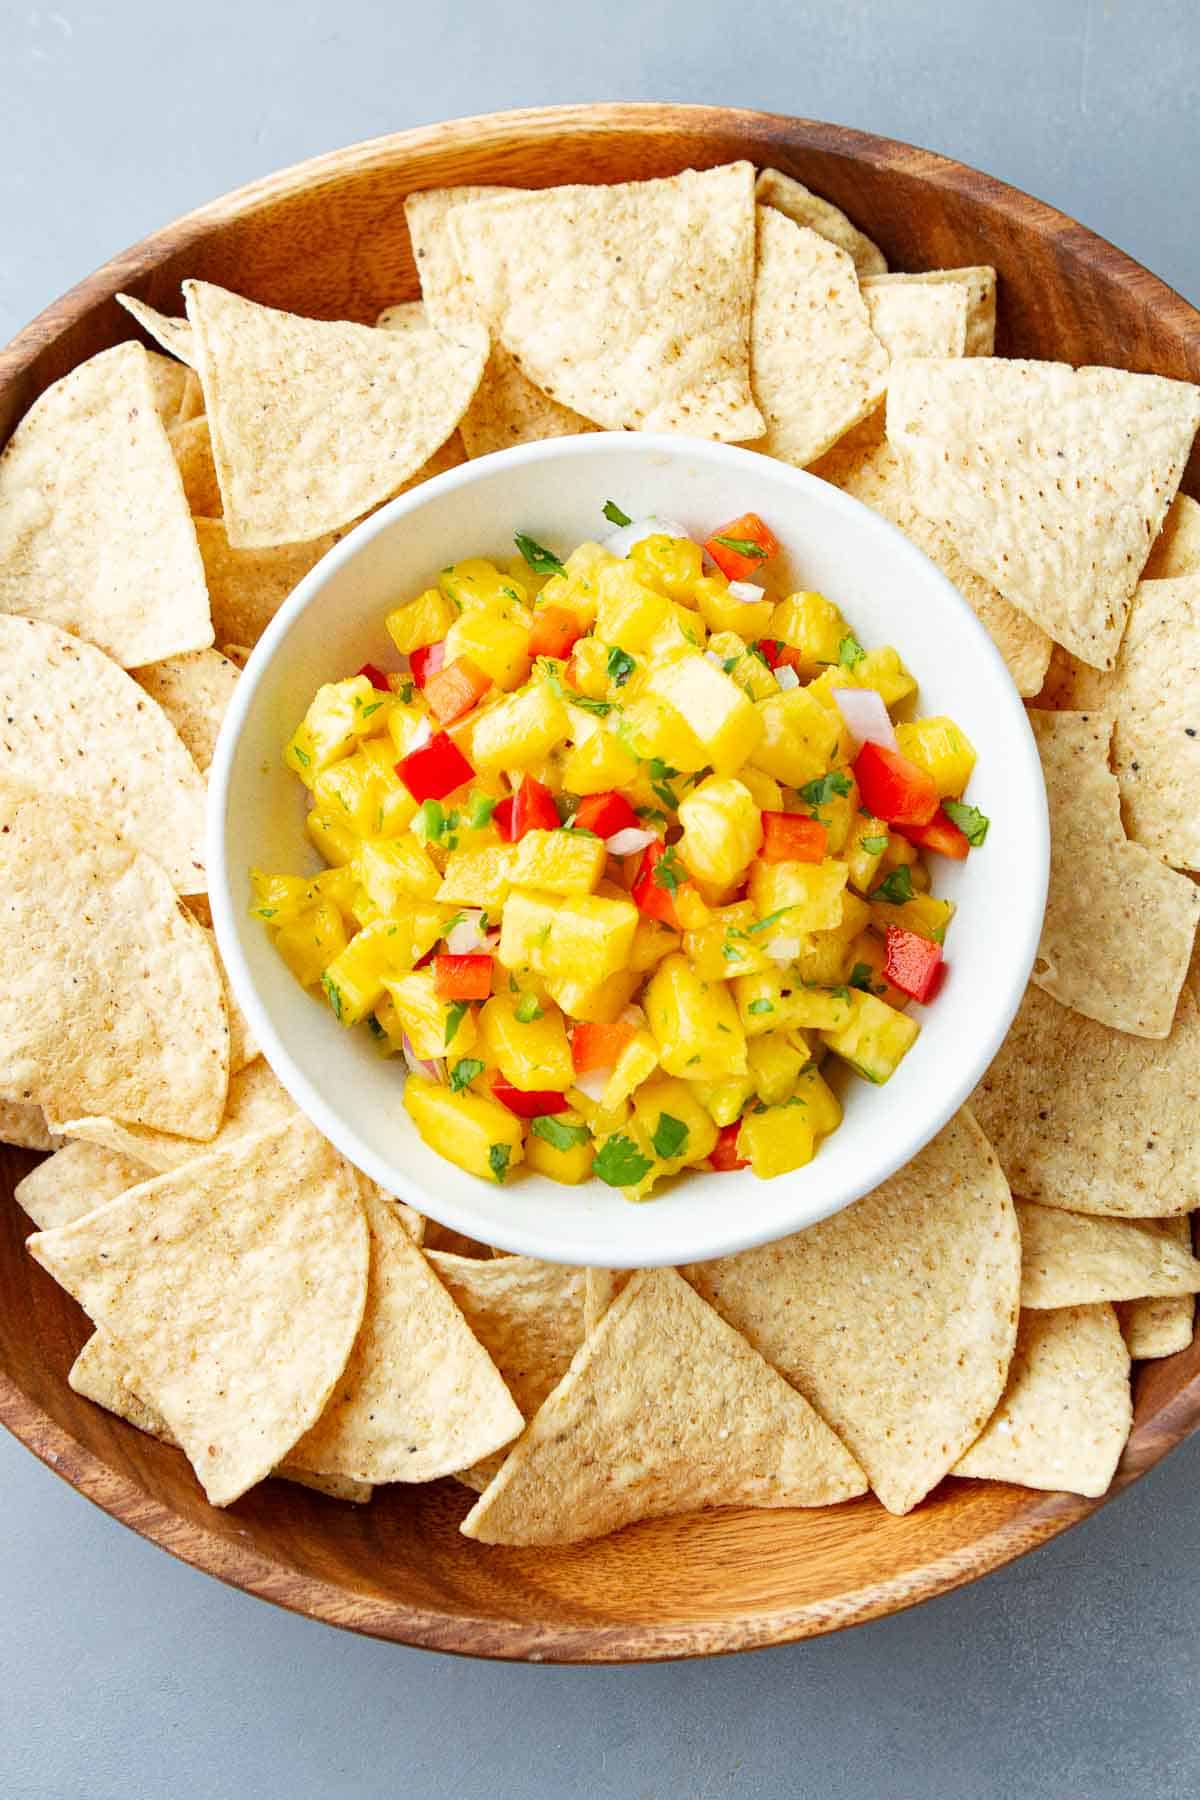 Chopped pineapple and red pepper in a bowl, with tortilla chips.